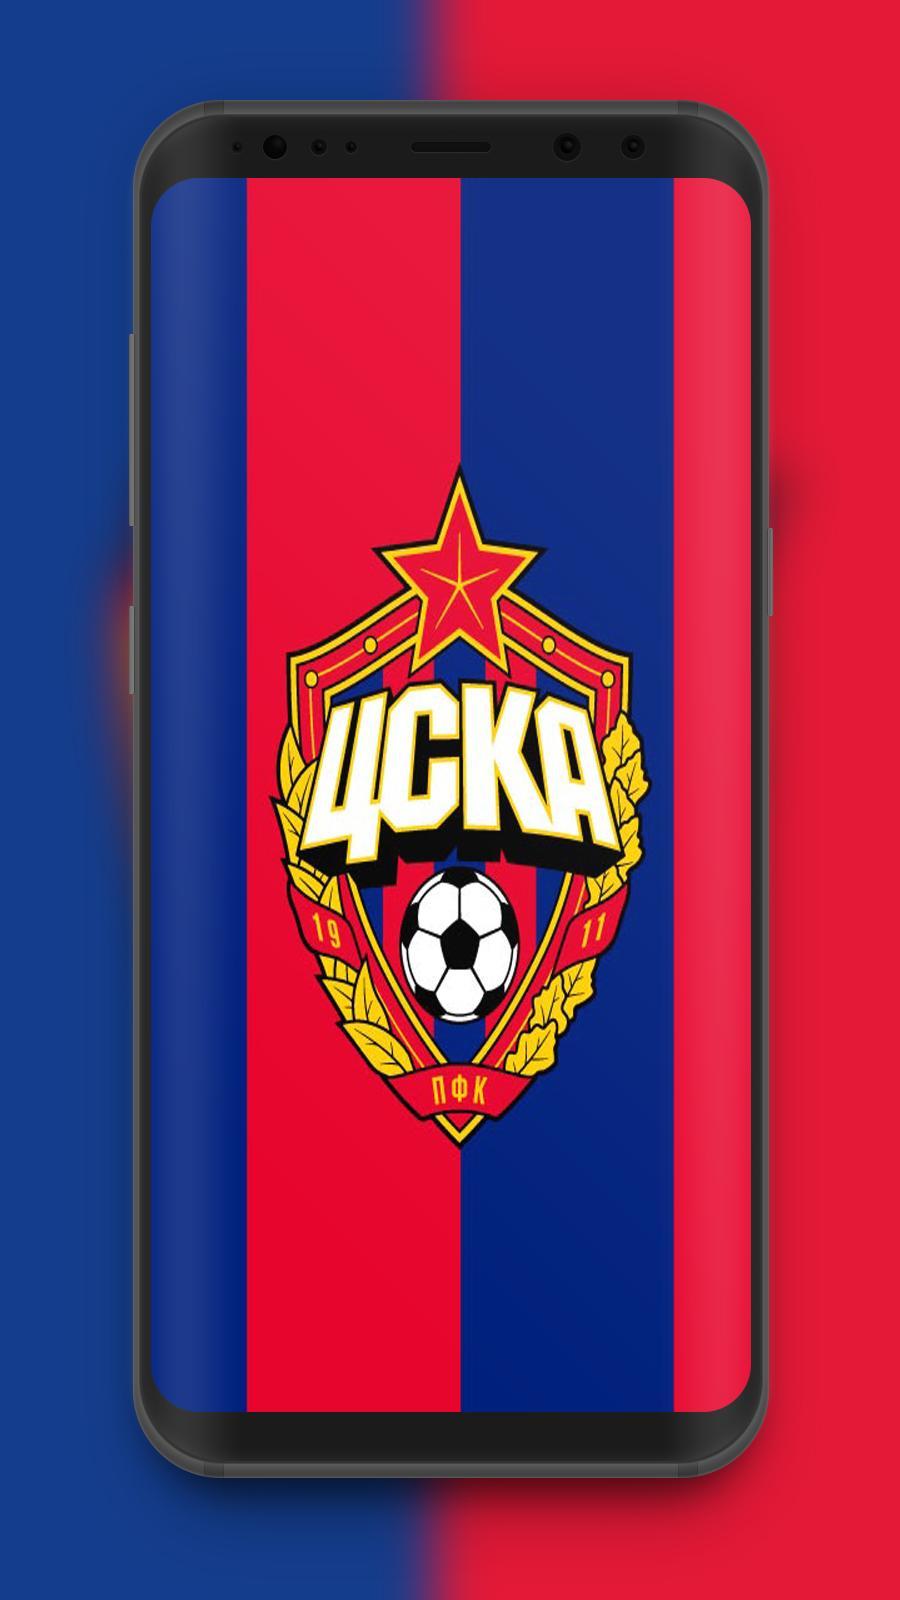 Cska Oboi For Android Apk Download